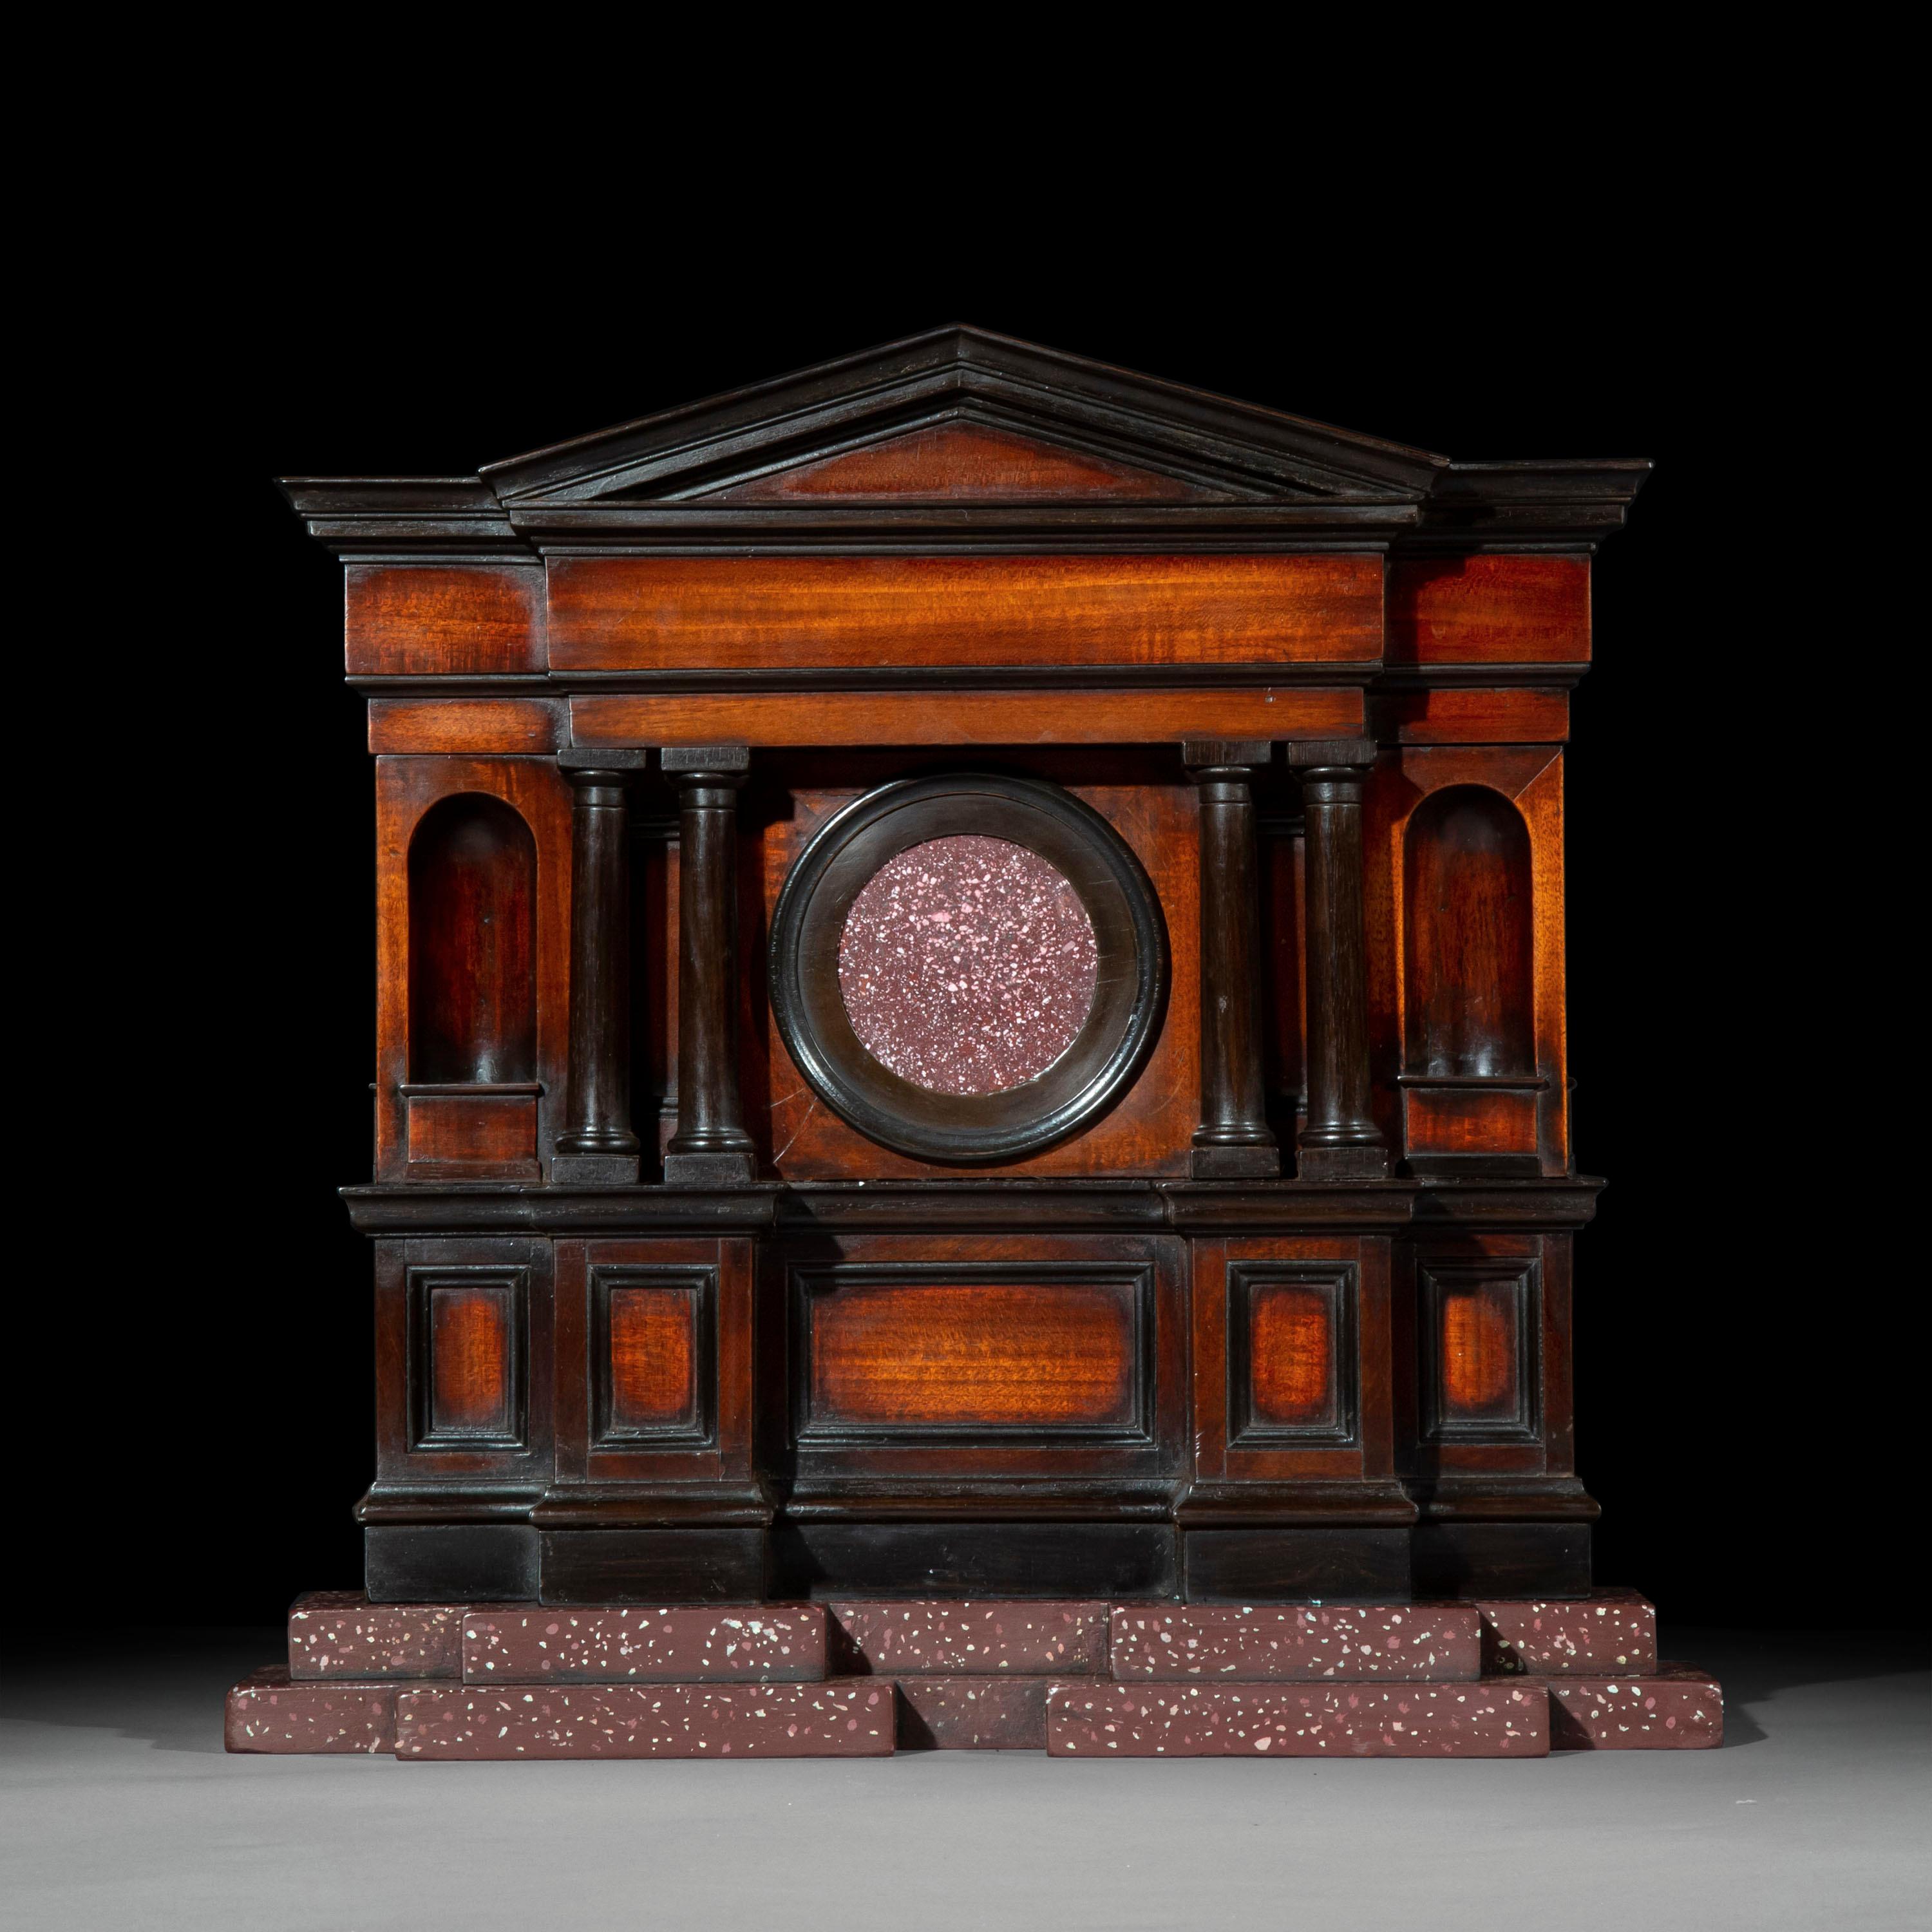 A superb quality George II period architectural model in mahogany and ebony, mounted with an Egyptian 'Imperial Porphyry' roundel.
England, circa 1750.

Why we like it
Exquisitely detailed throughout, this splendid object would have had a proud